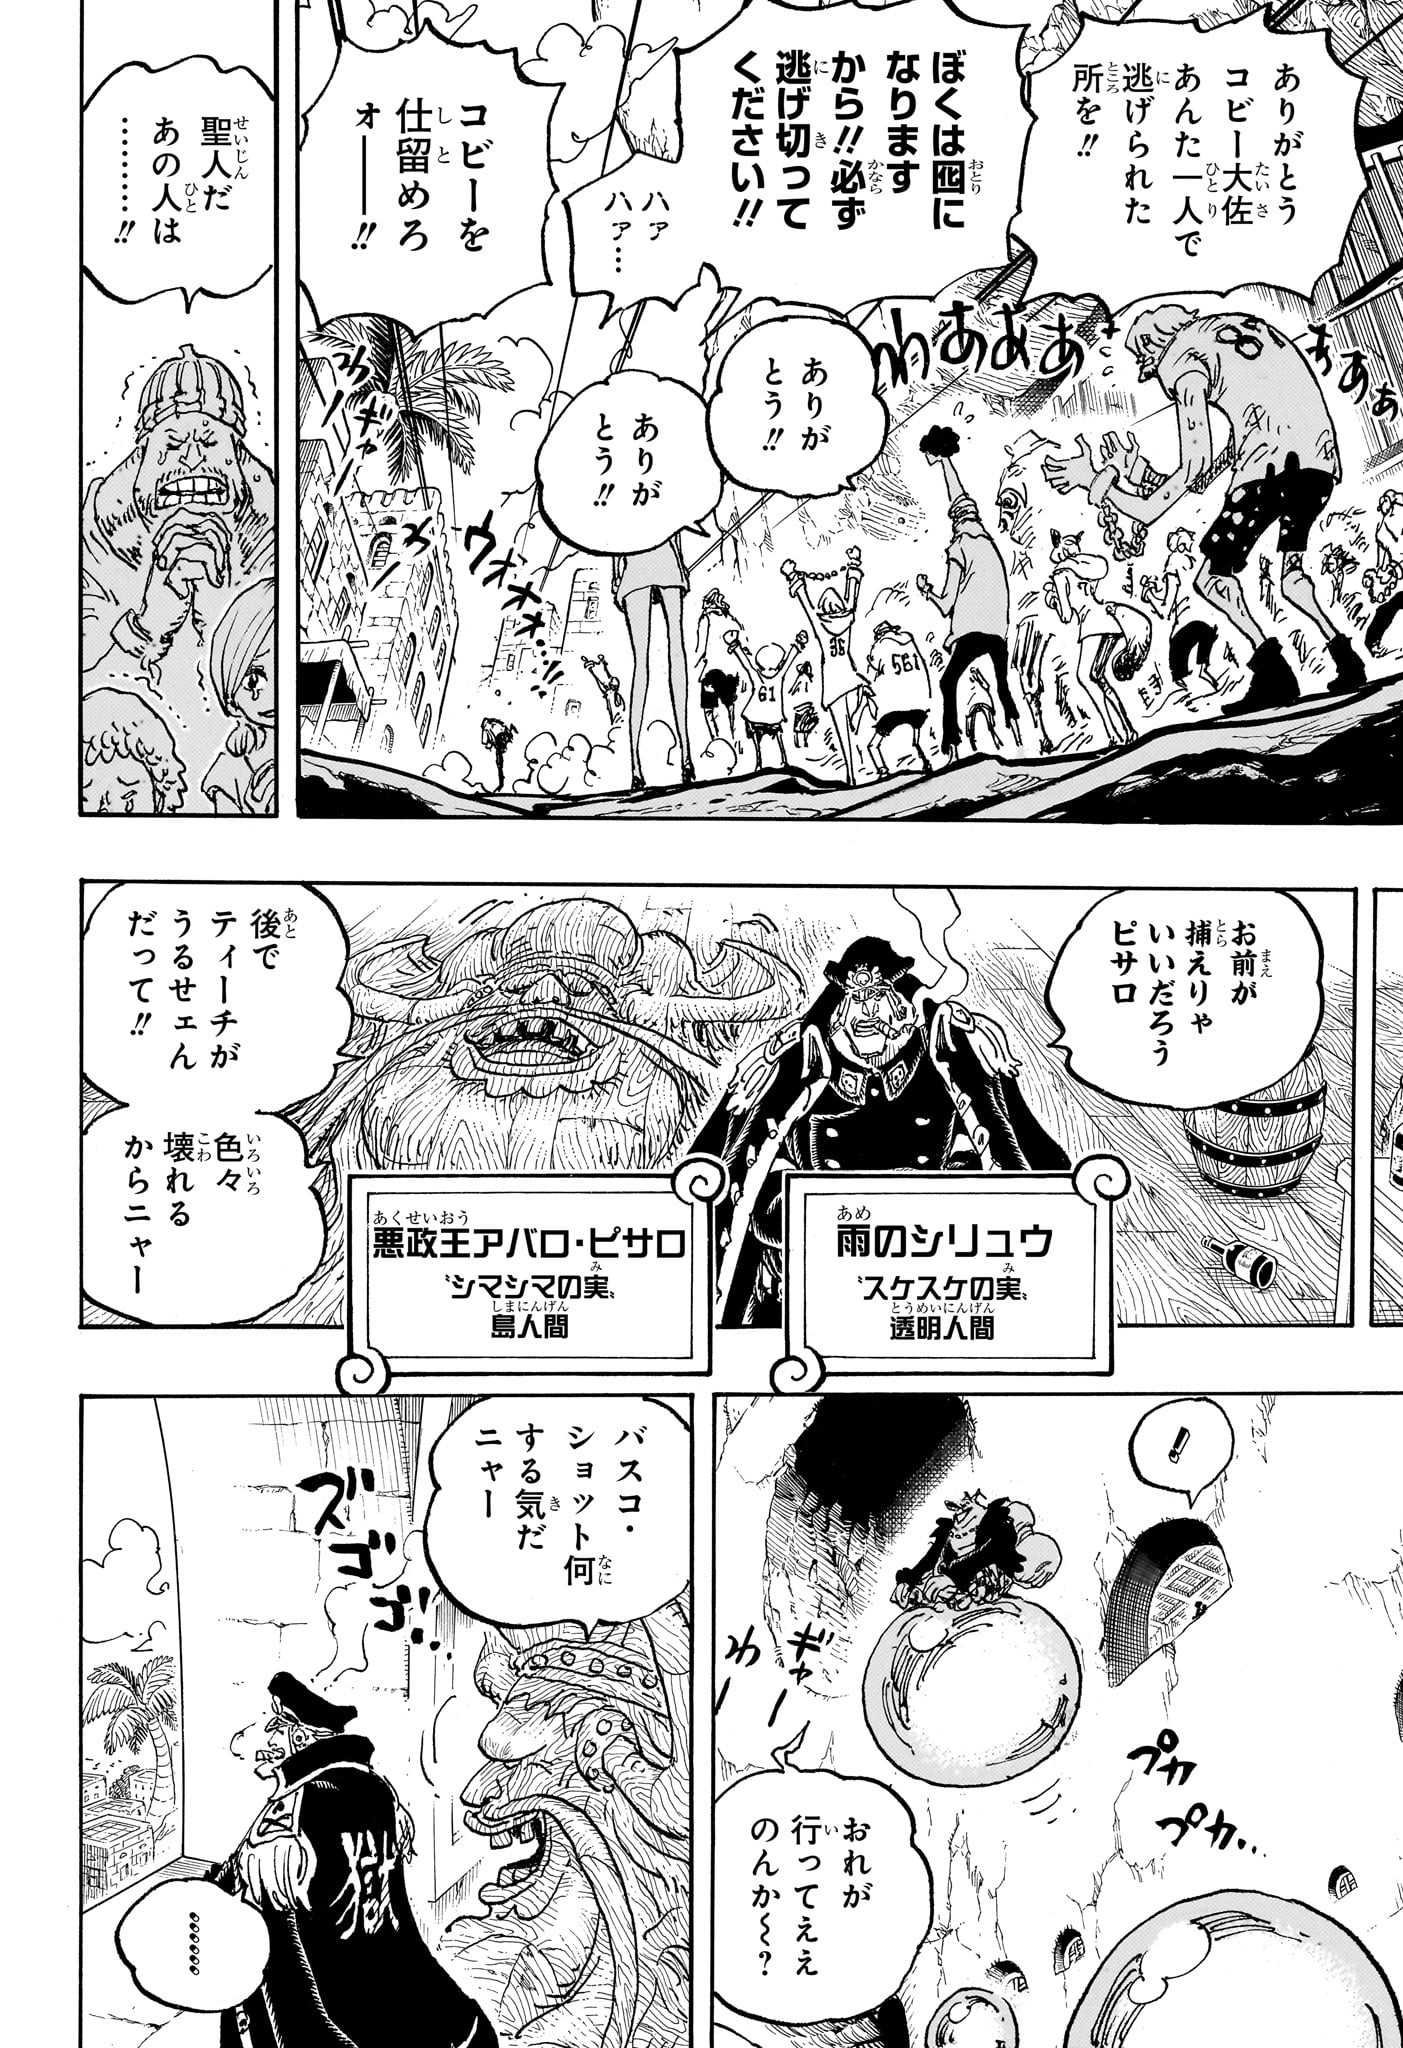 One Piece - Chapter 1080 - Page 4